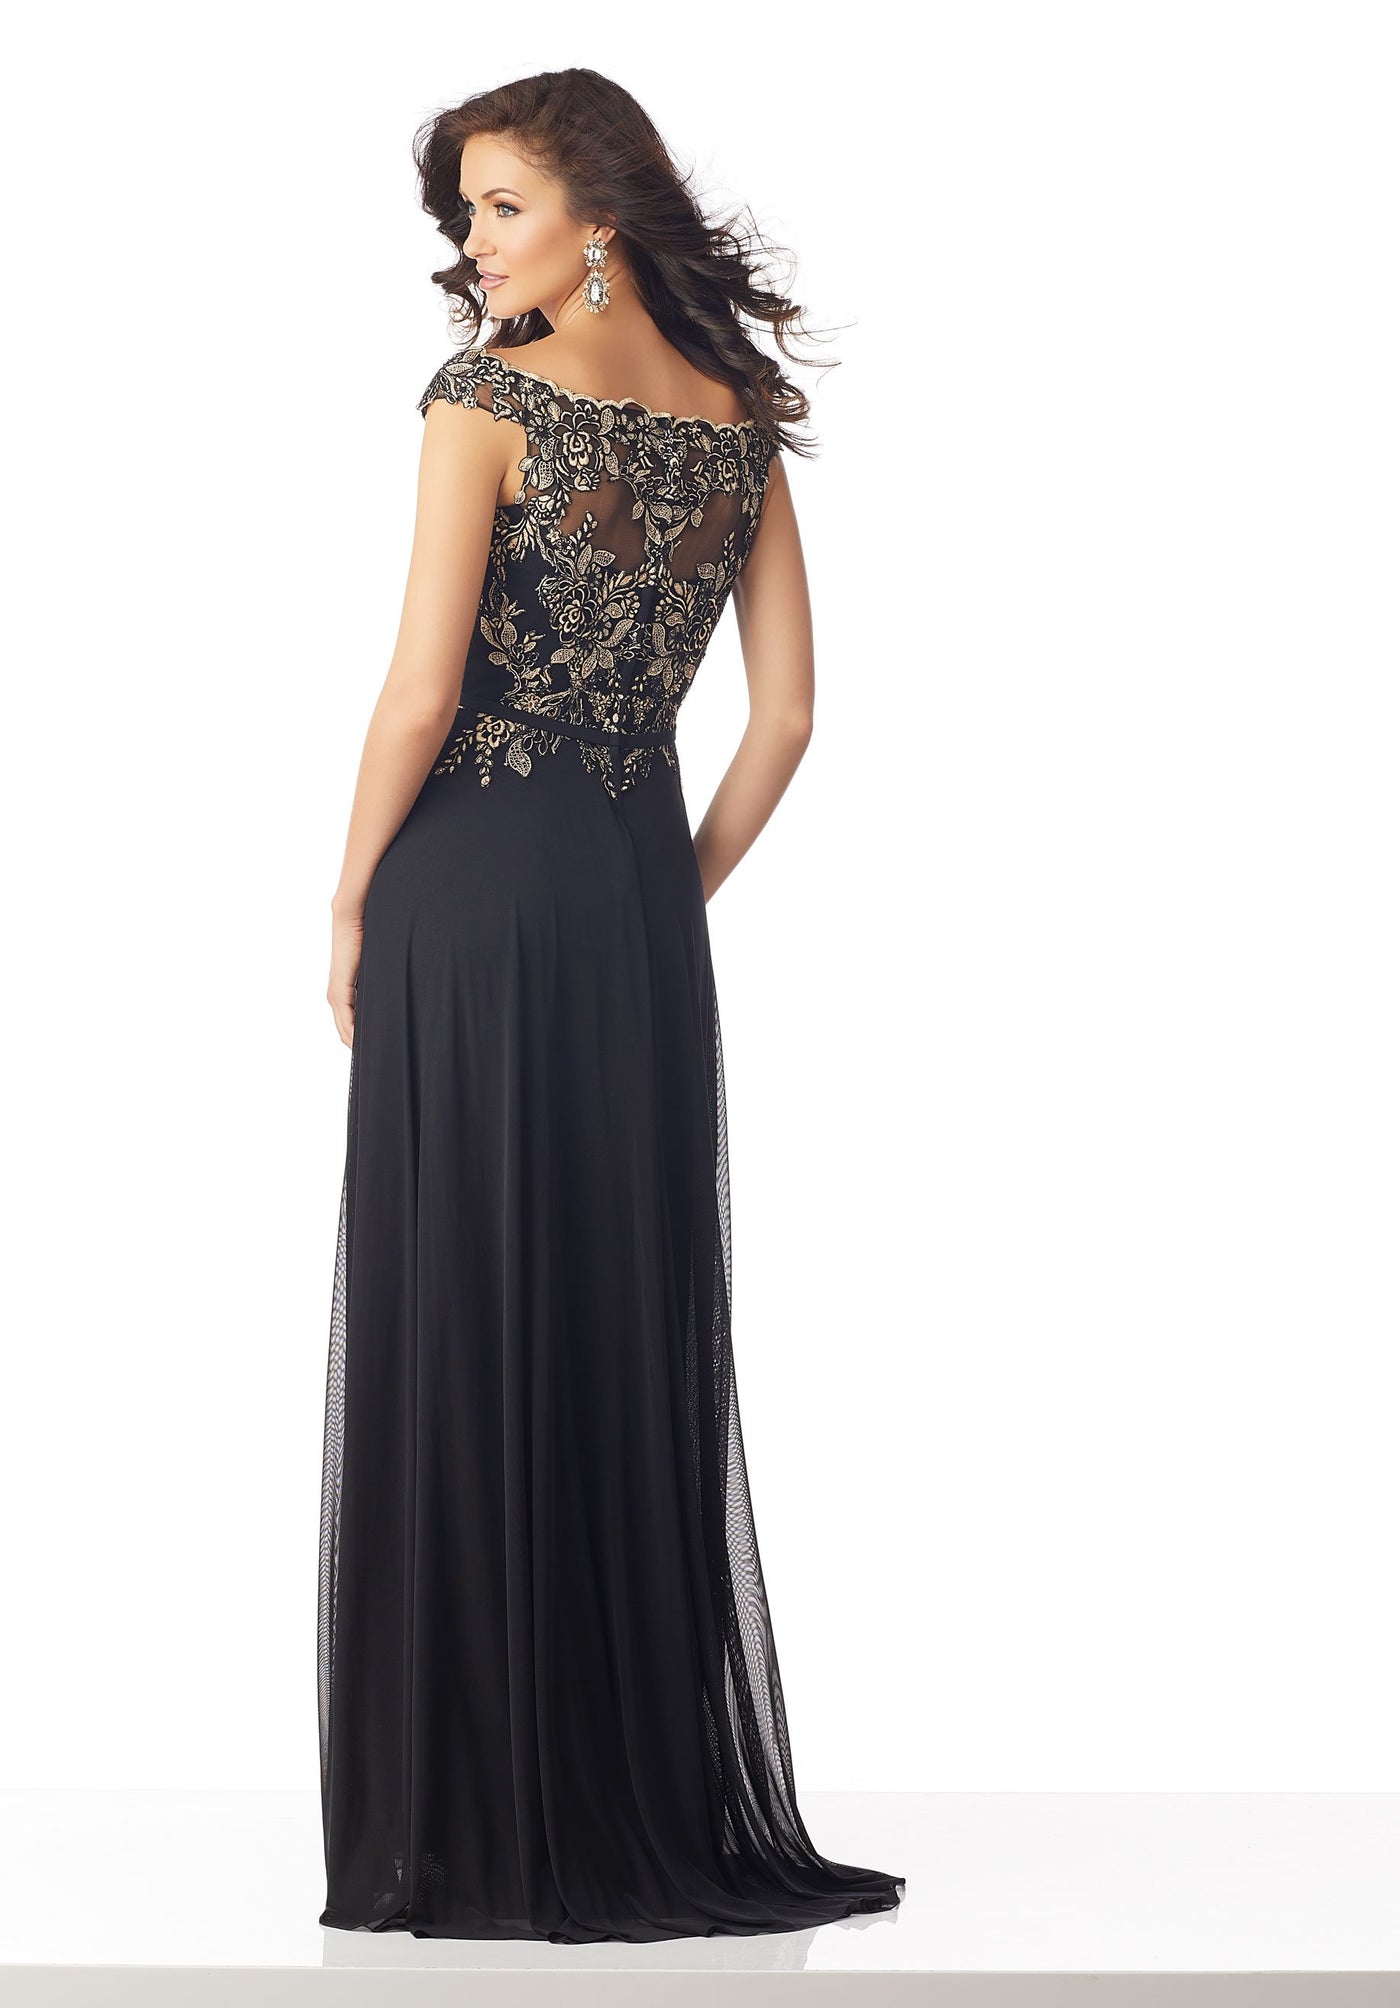 MGNY By Mori Lee - 71802 Appliqued V-Neck A-Line Gown In Black and Gold